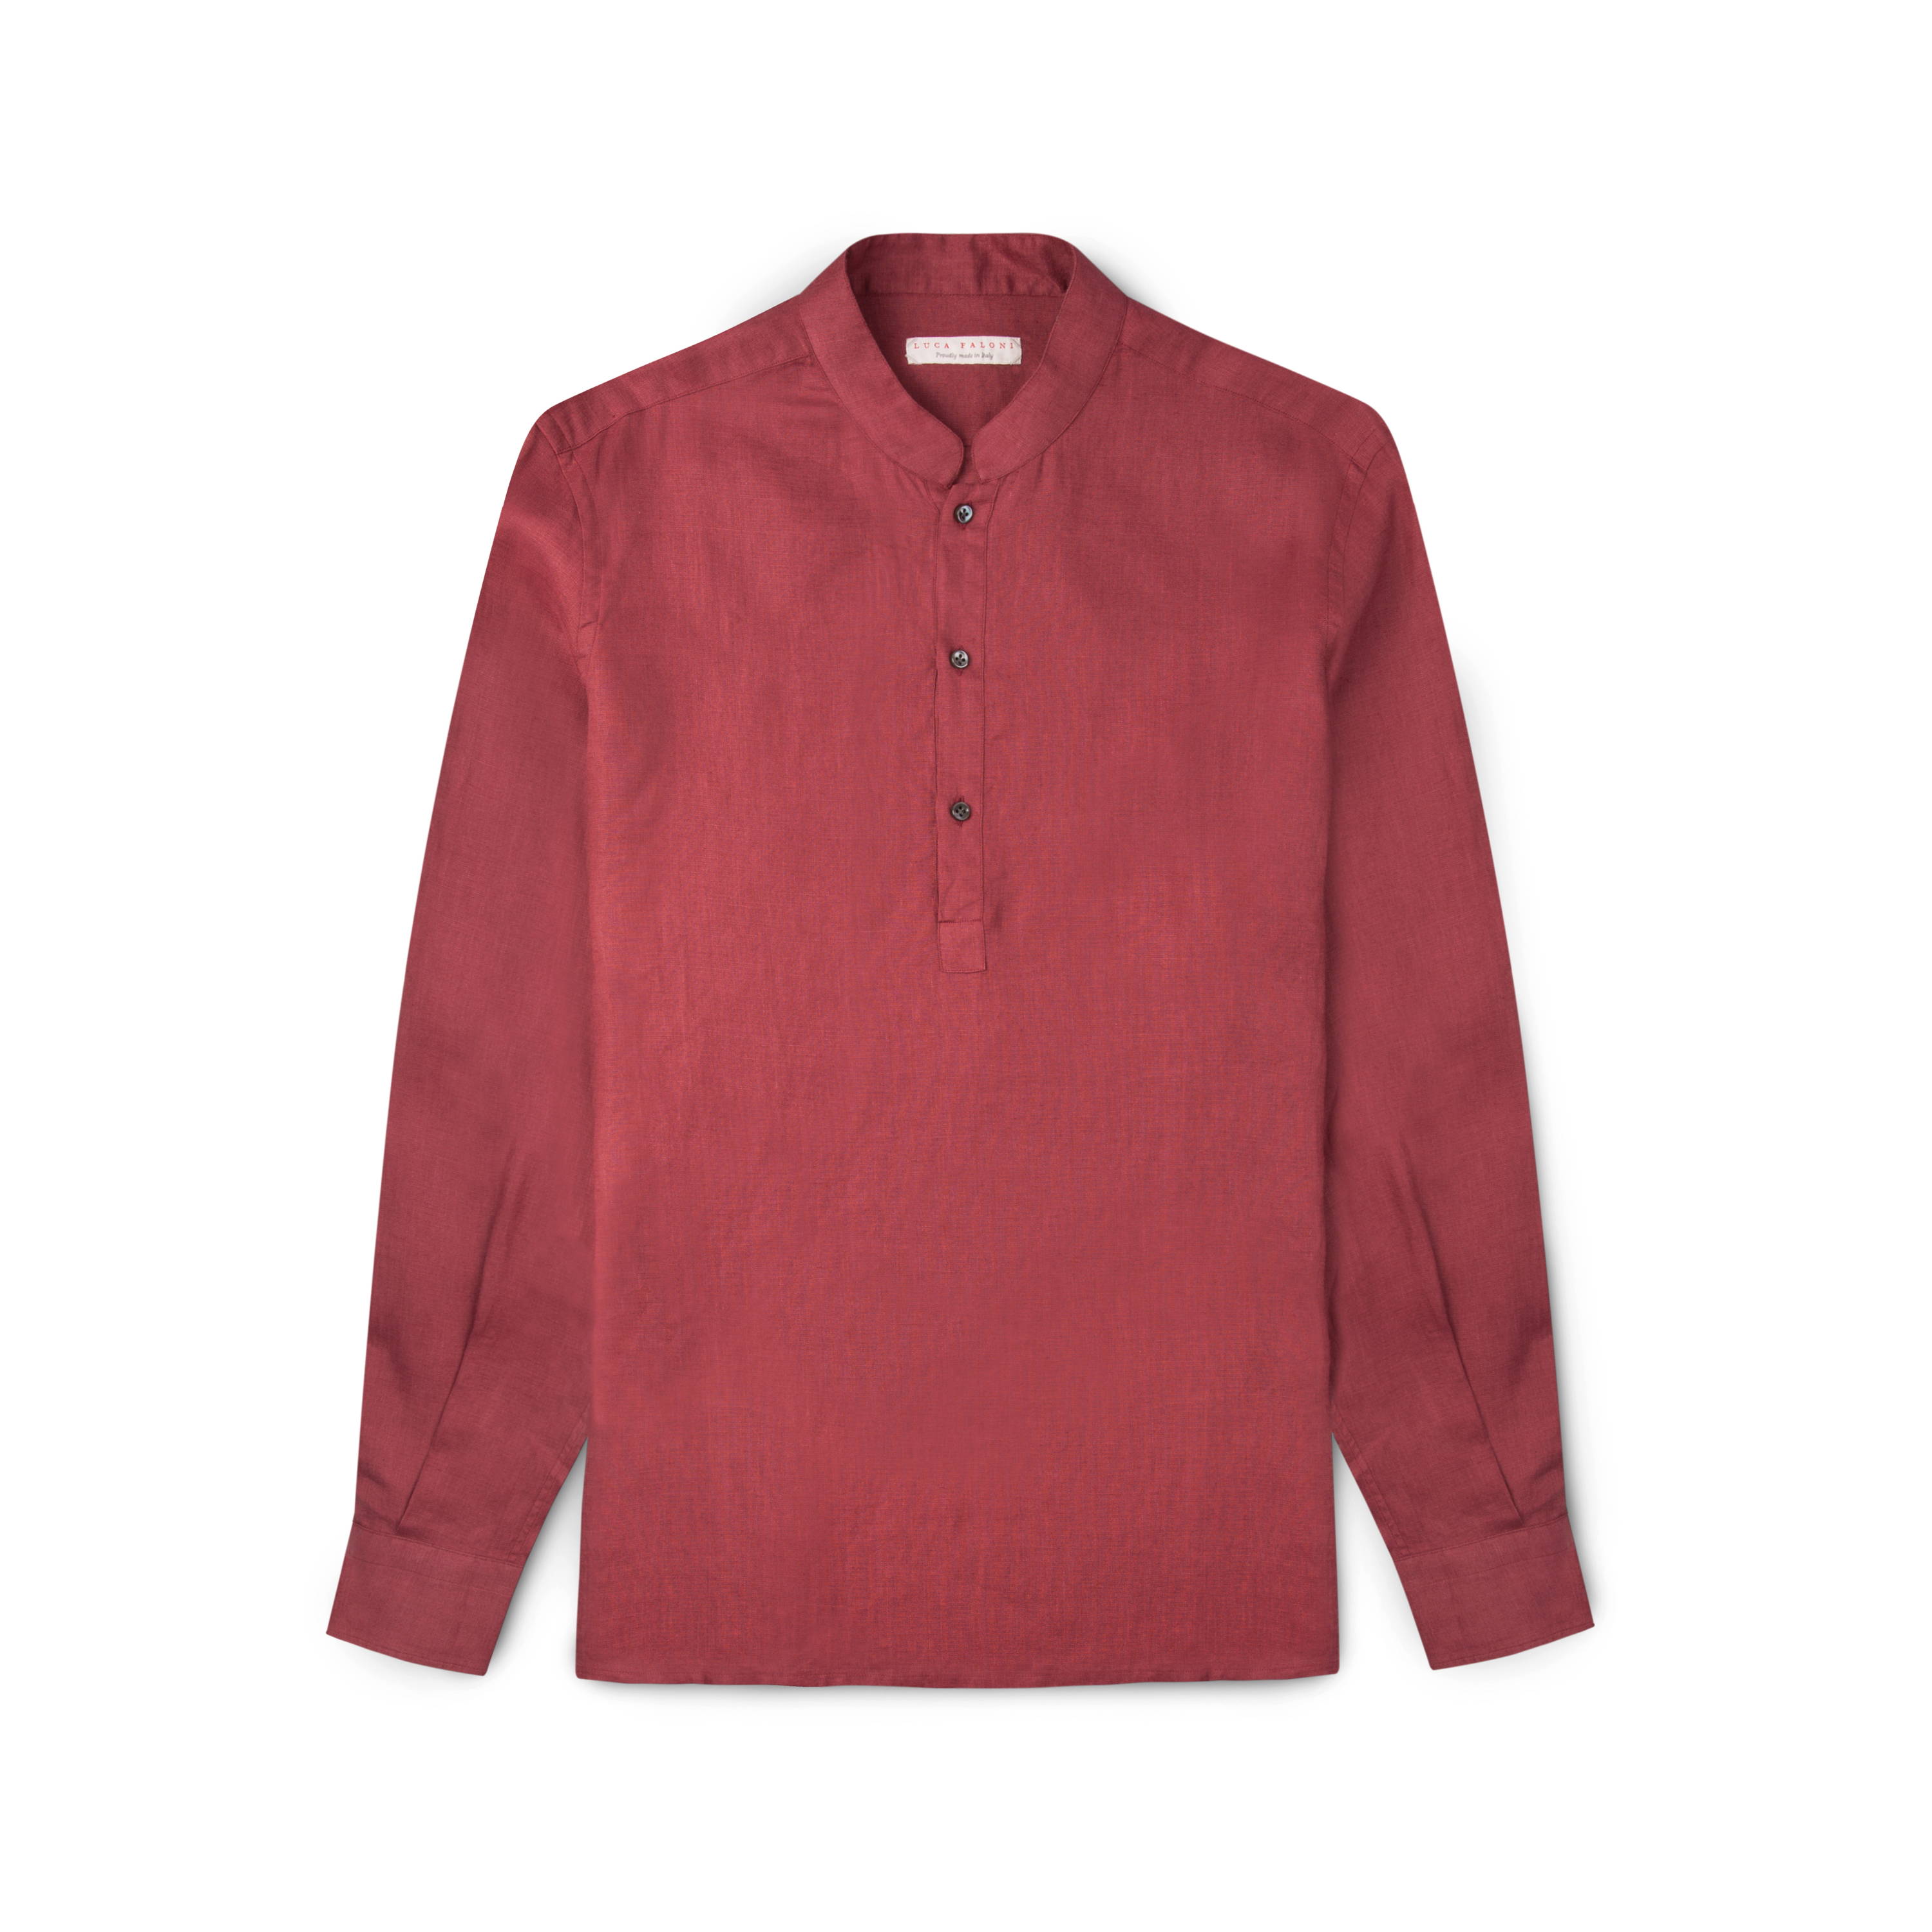 Luca Faloni Lava Red Forte Linen Shirt Made in Italy